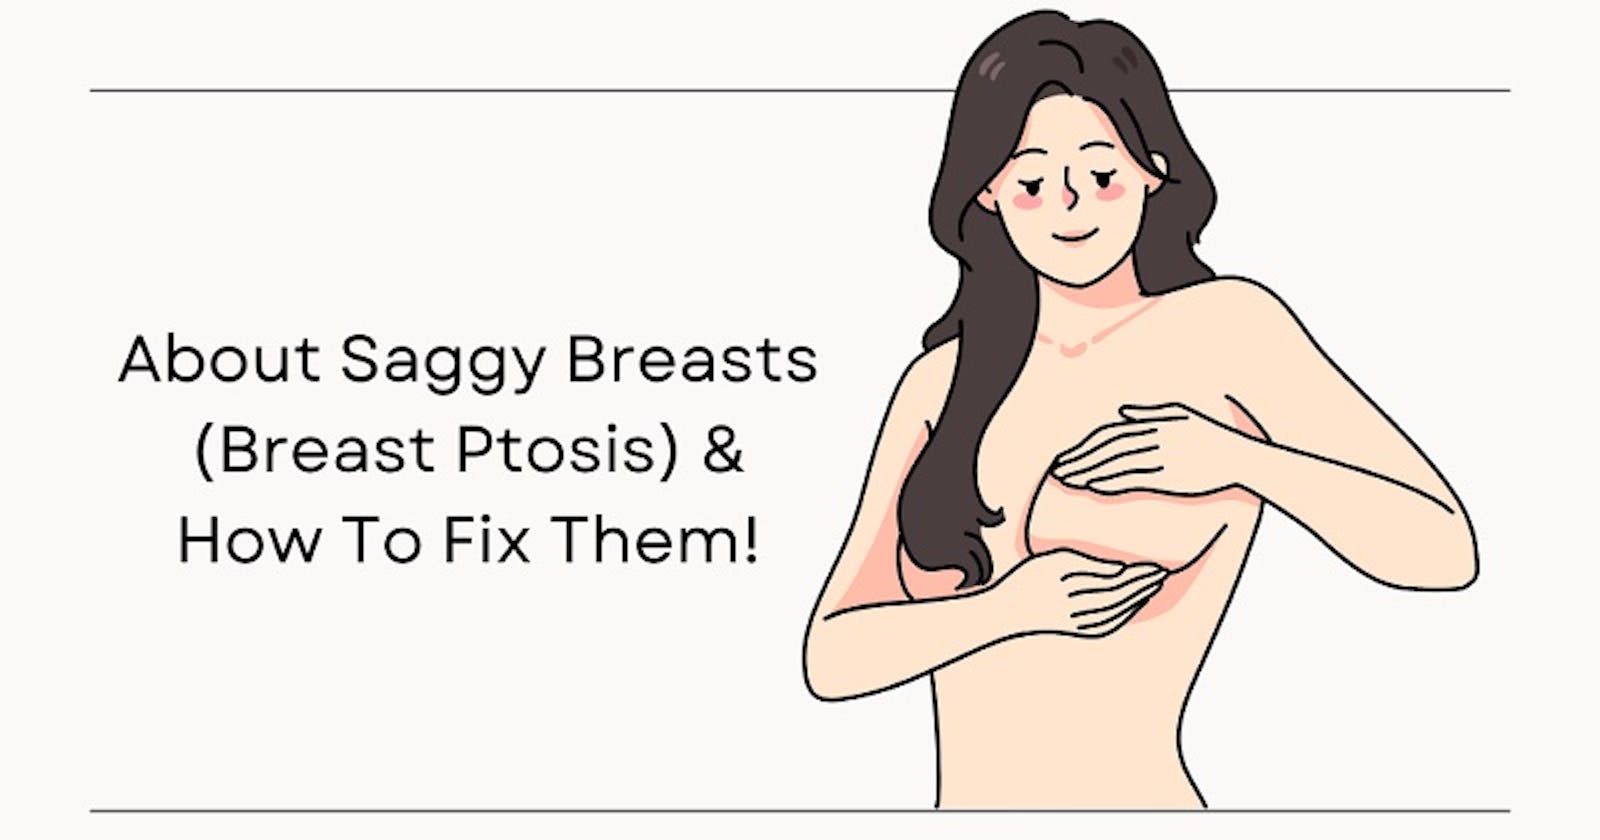 Breast ptosis, what is it and how to fix them?